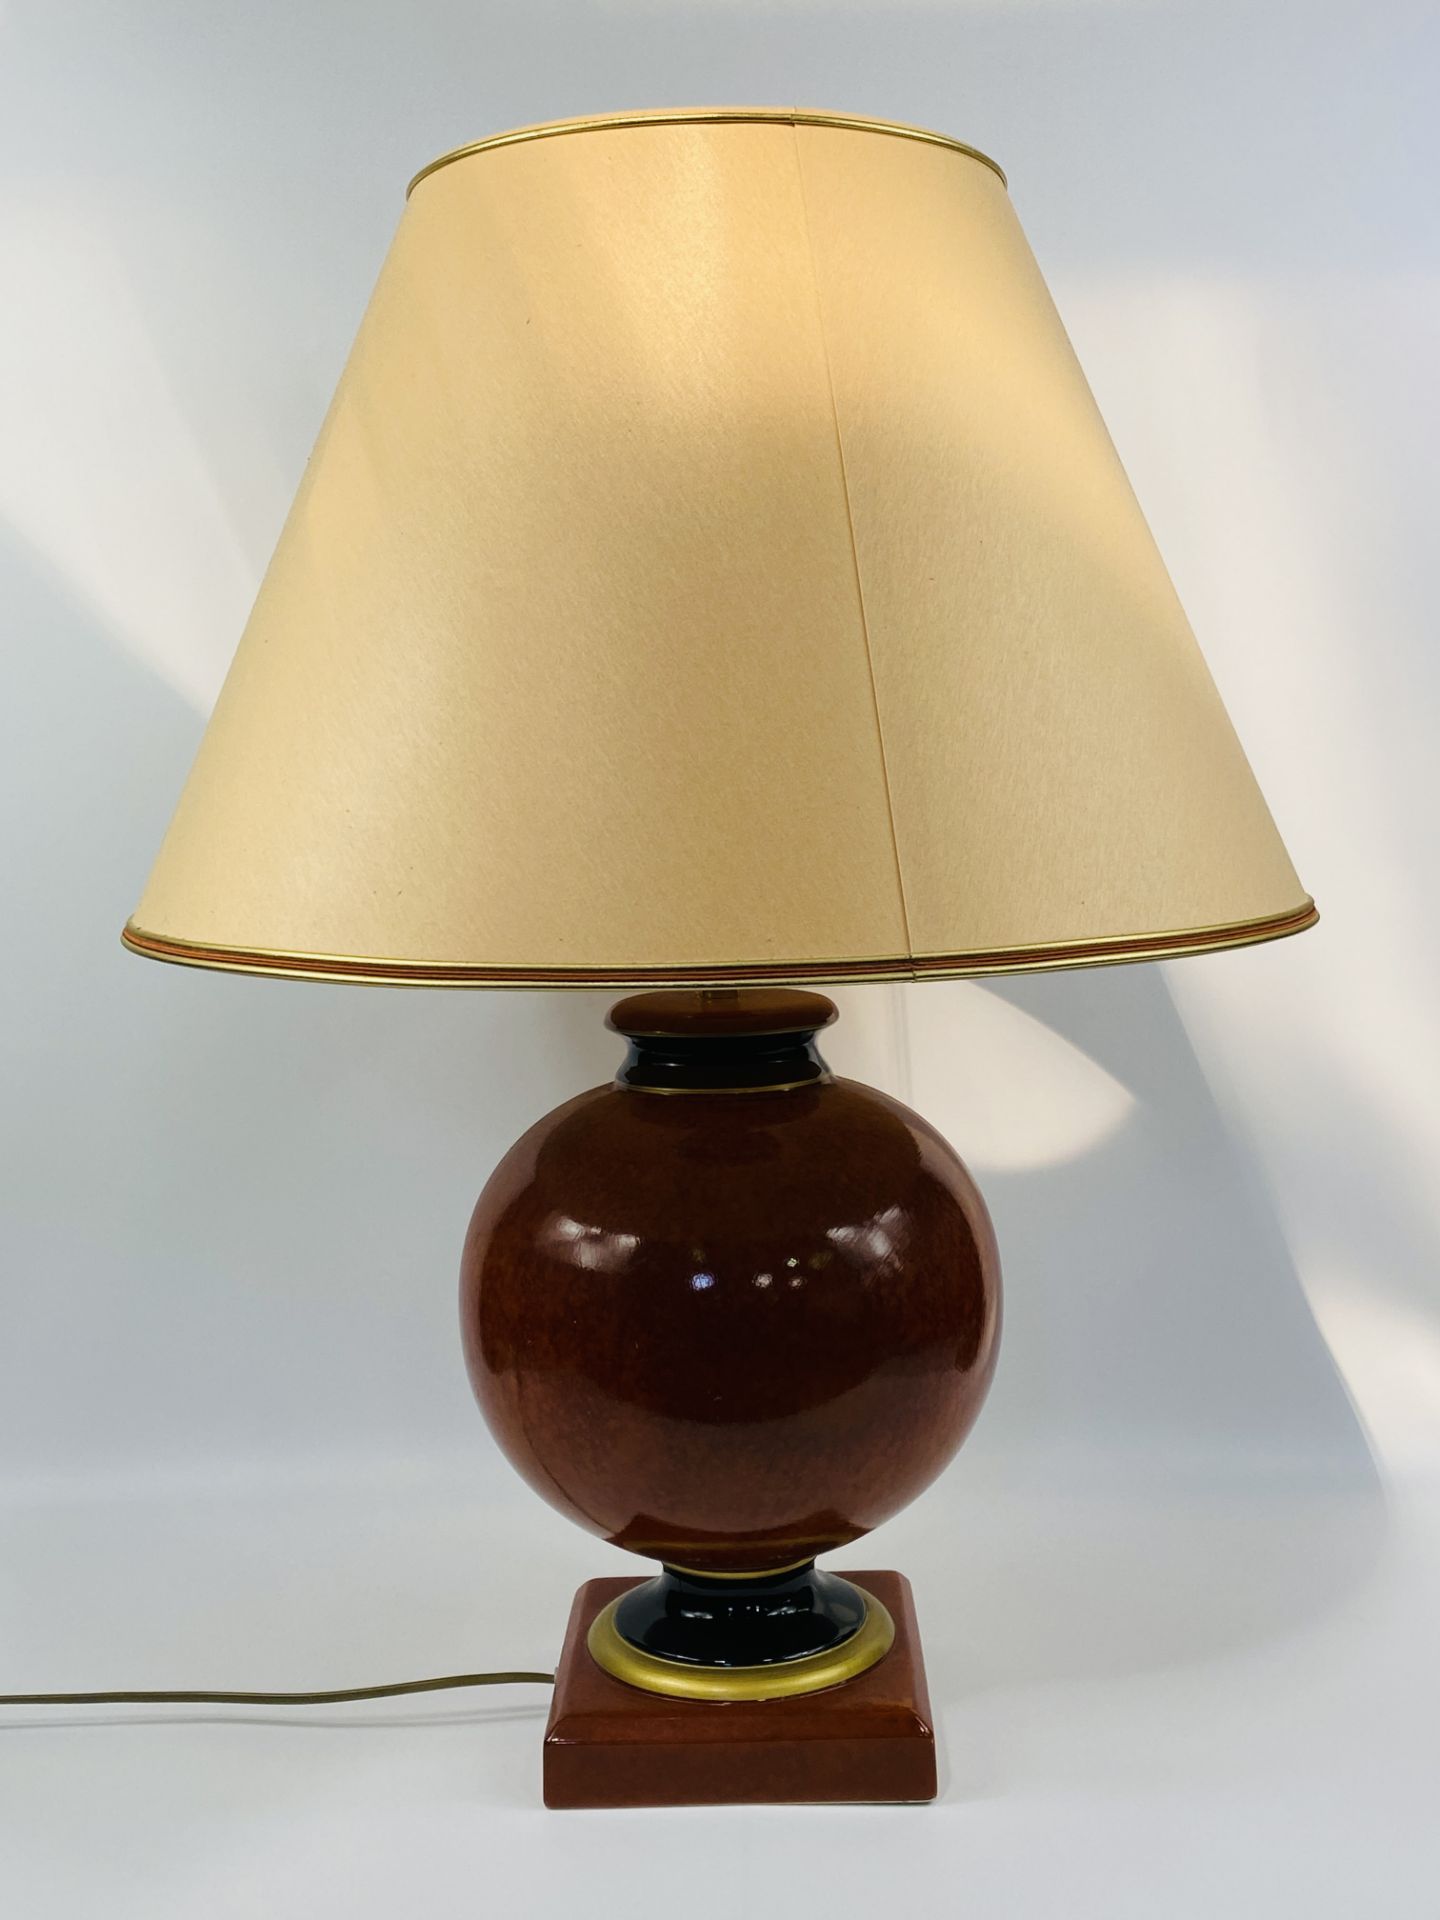 Pair of ceramic table lamps - Image 2 of 5